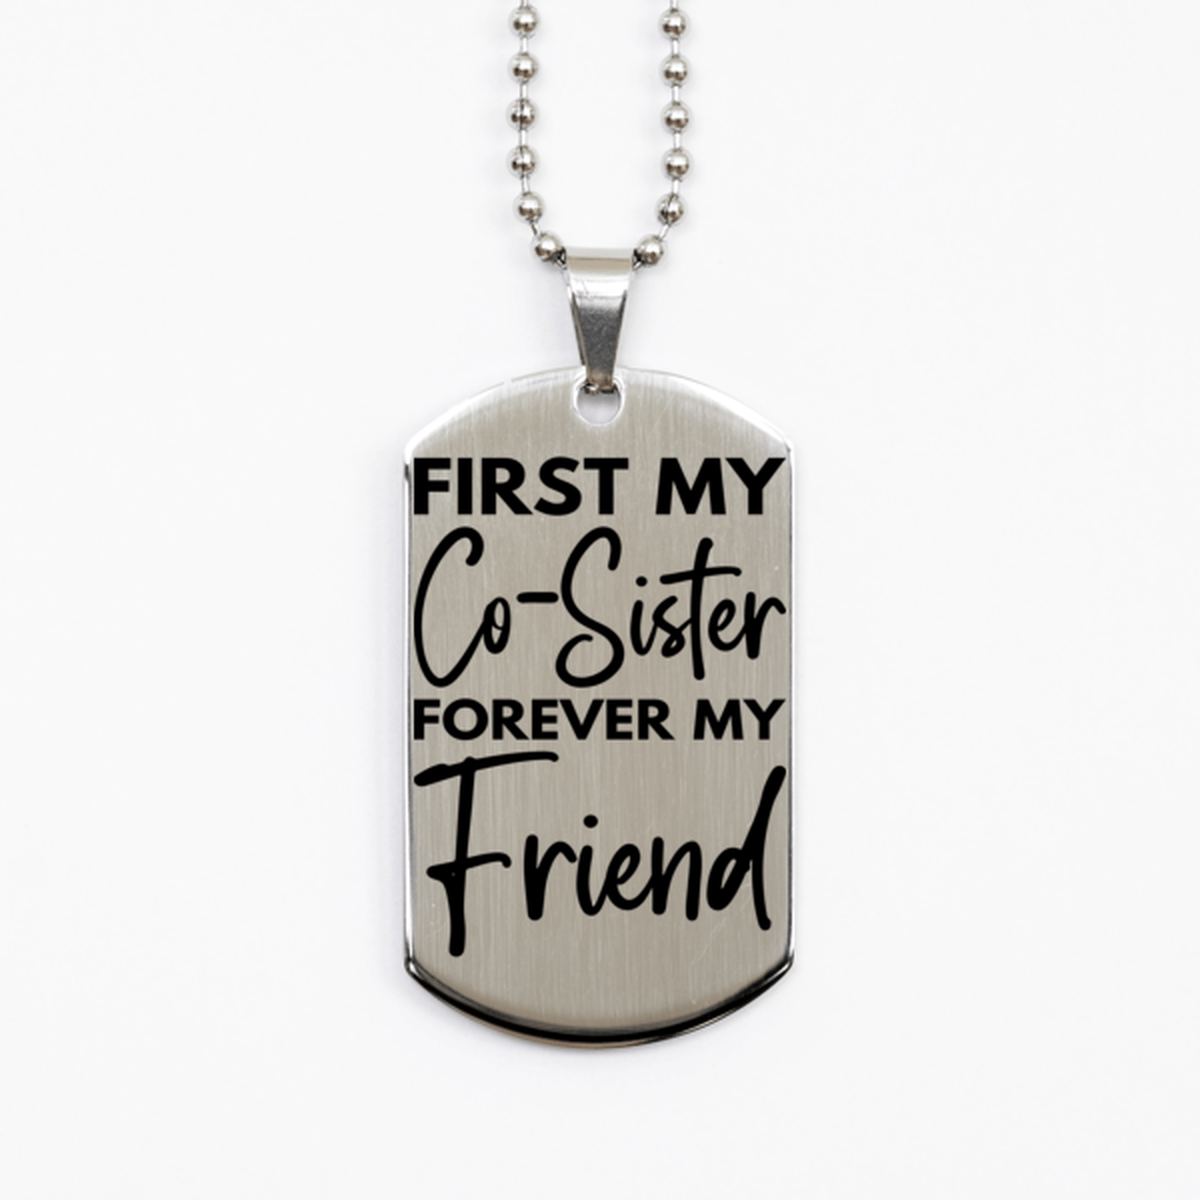 Inspirational Co-Sister Silver Dog Tag Necklace, First My Co-Sister Forever My Friend, Best Birthday Gifts for Co-Sister